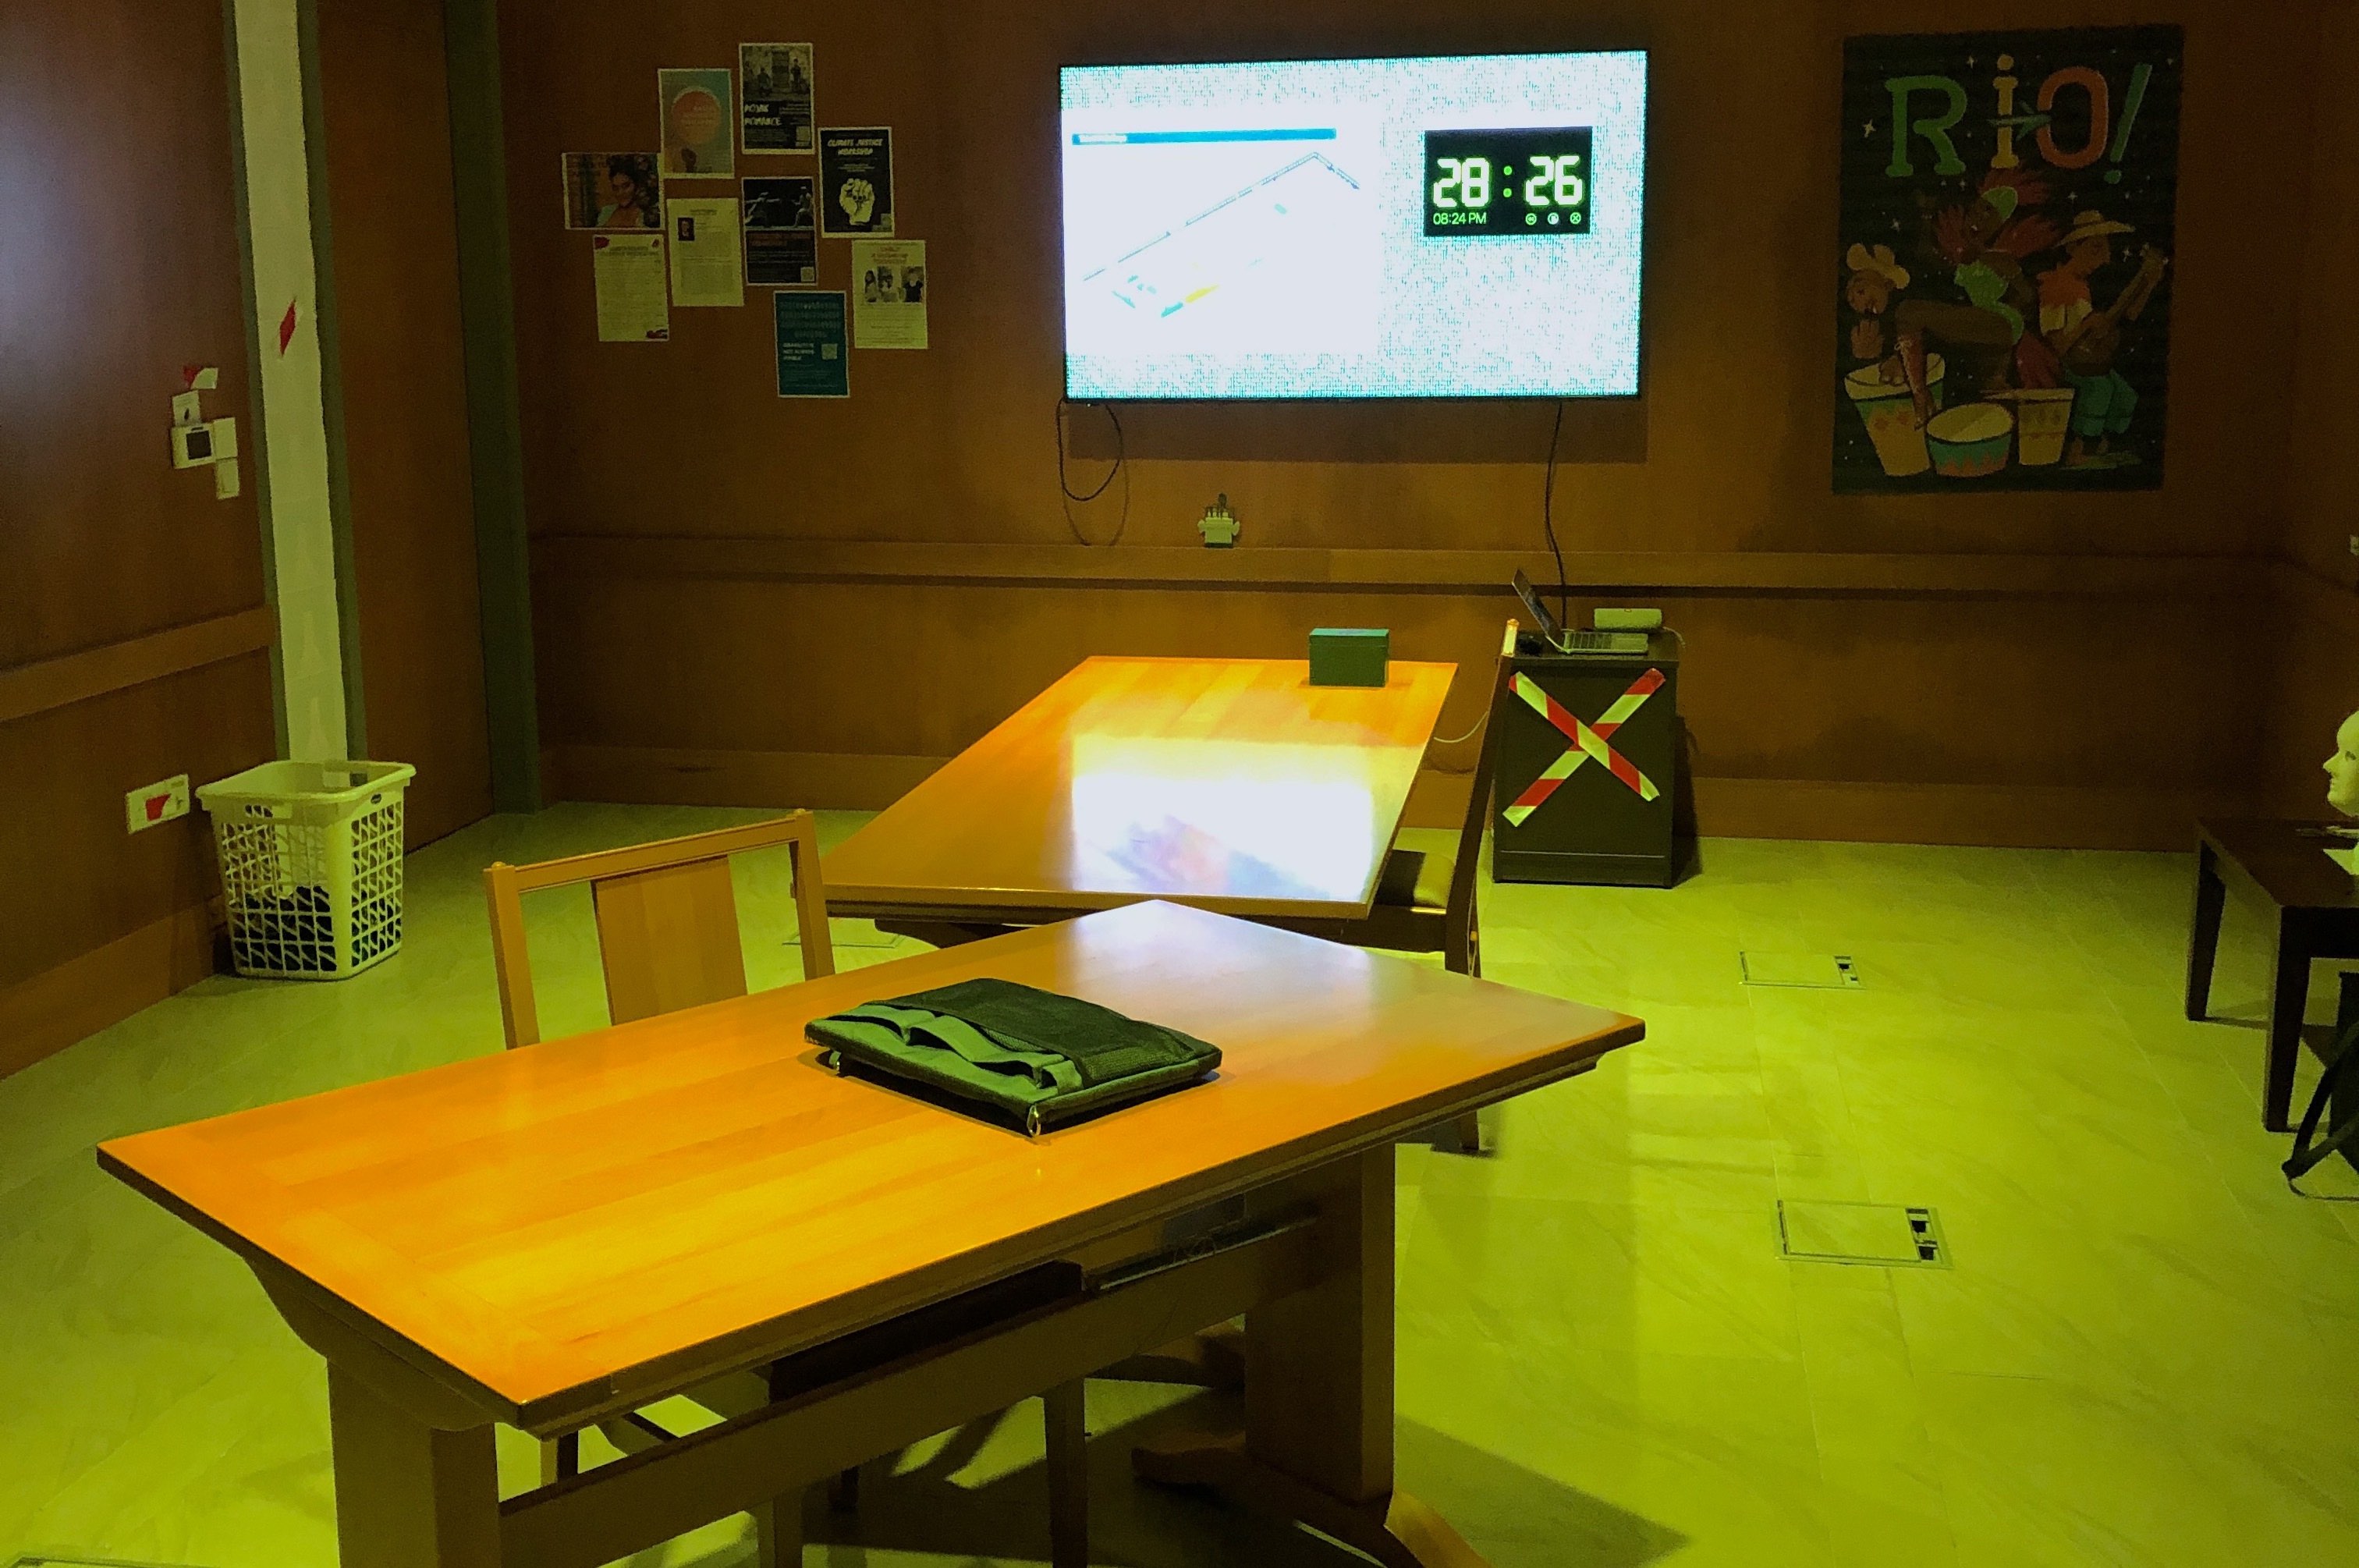 Photograph of a vacant room with green lights. Two tables with a locked pouch on them. A TV showing a timer, 28 minutes 26 seconds. There are many posters on the walls.